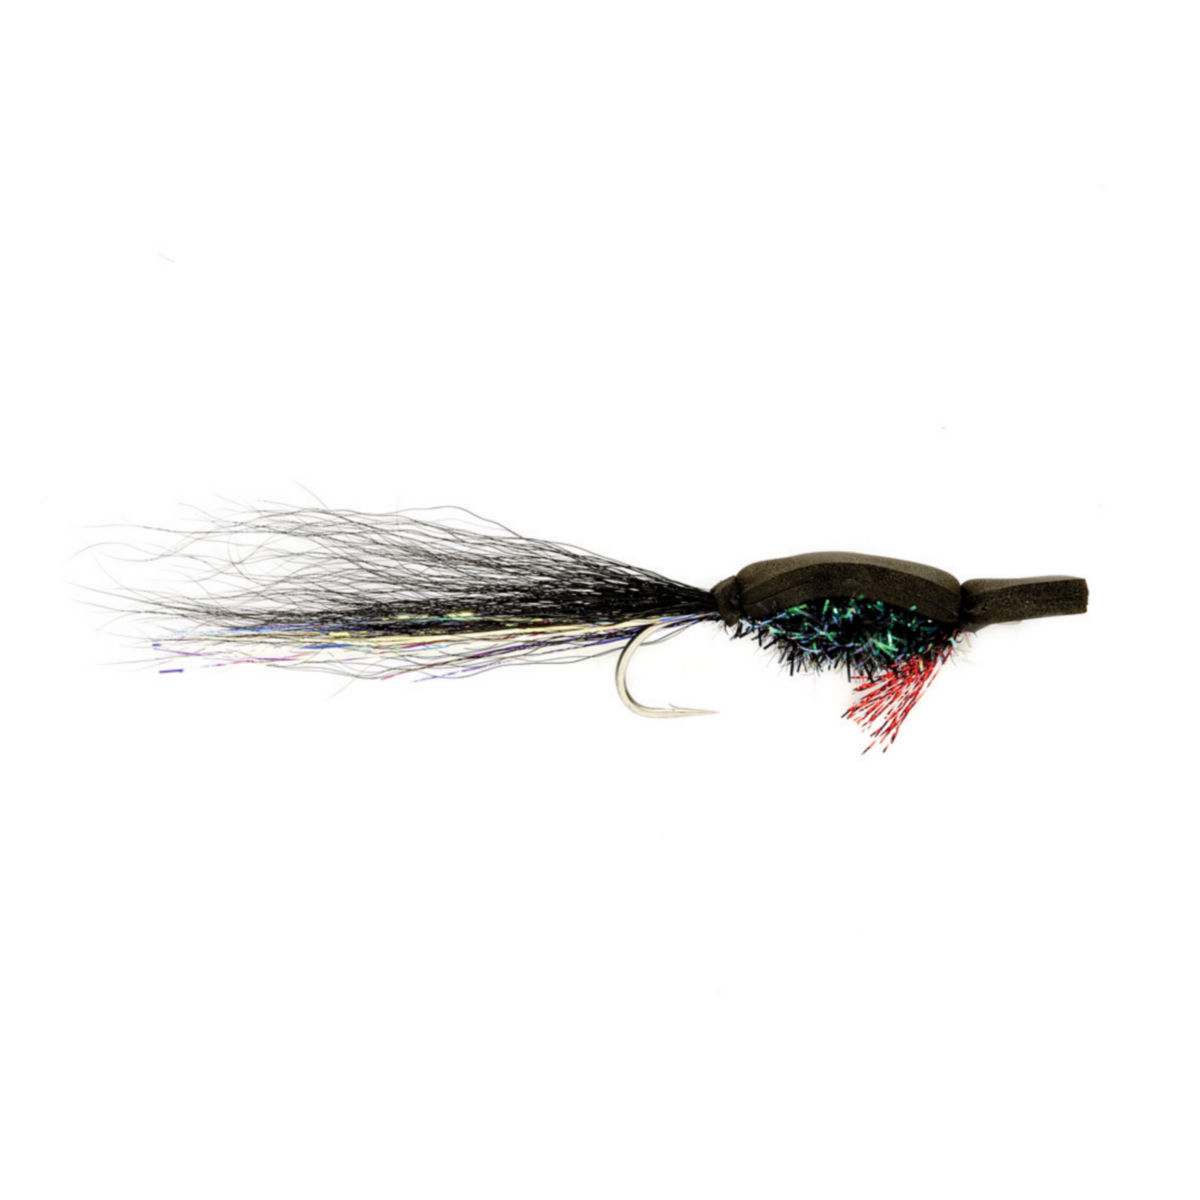 surface lure Bass Gurgler size 1/0 - Saltwater Fly pike trout 